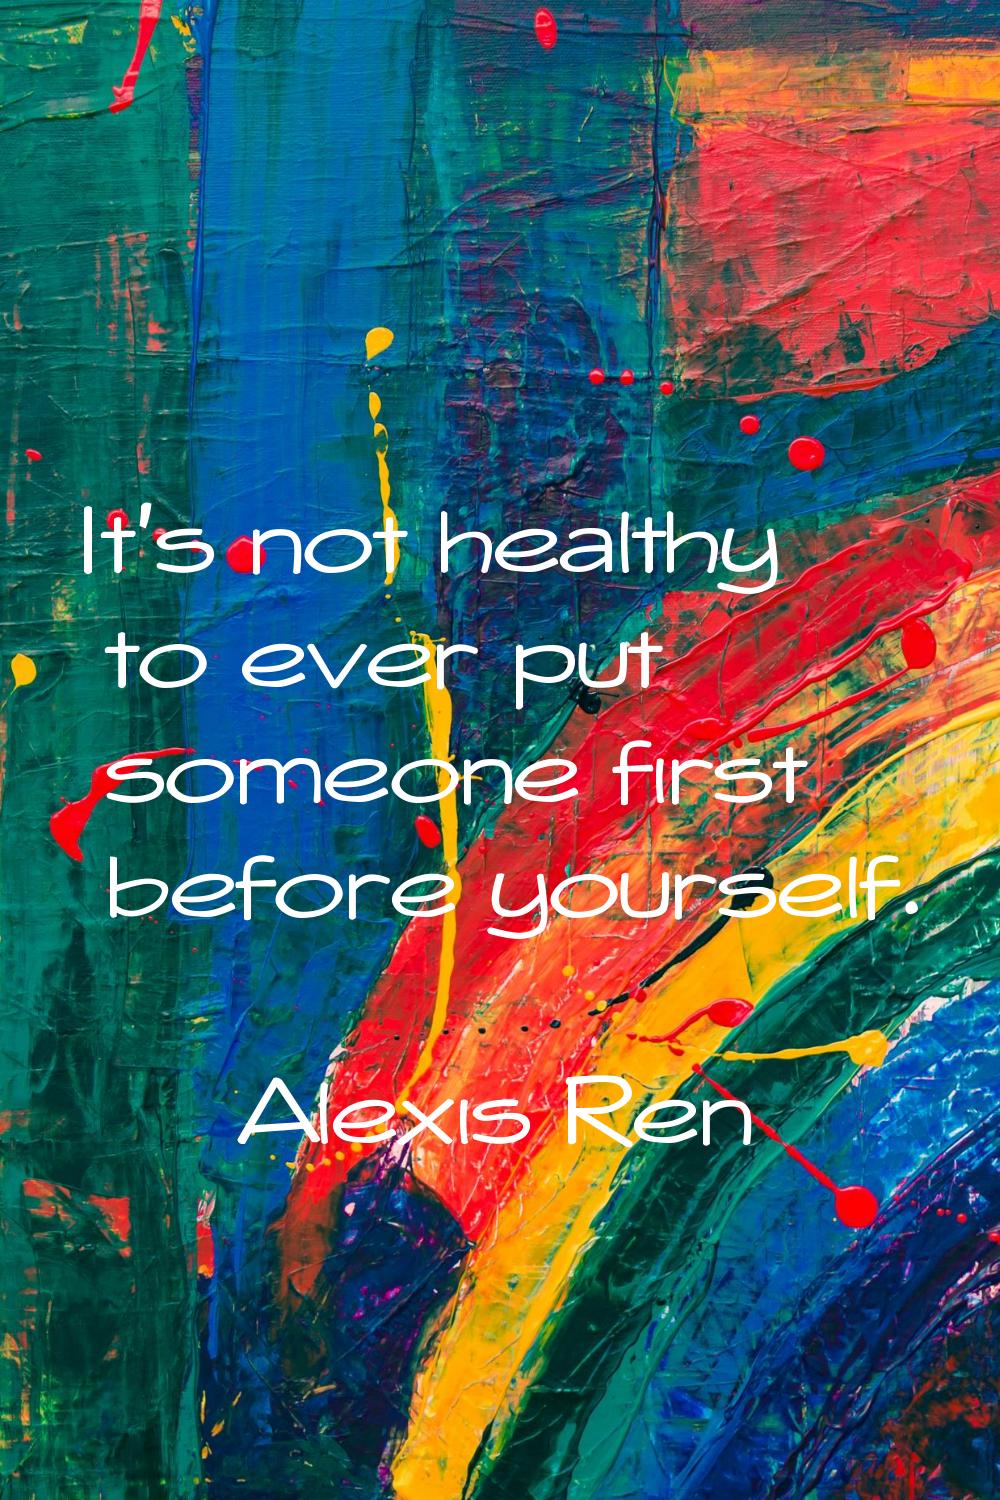 It's not healthy to ever put someone first before yourself.